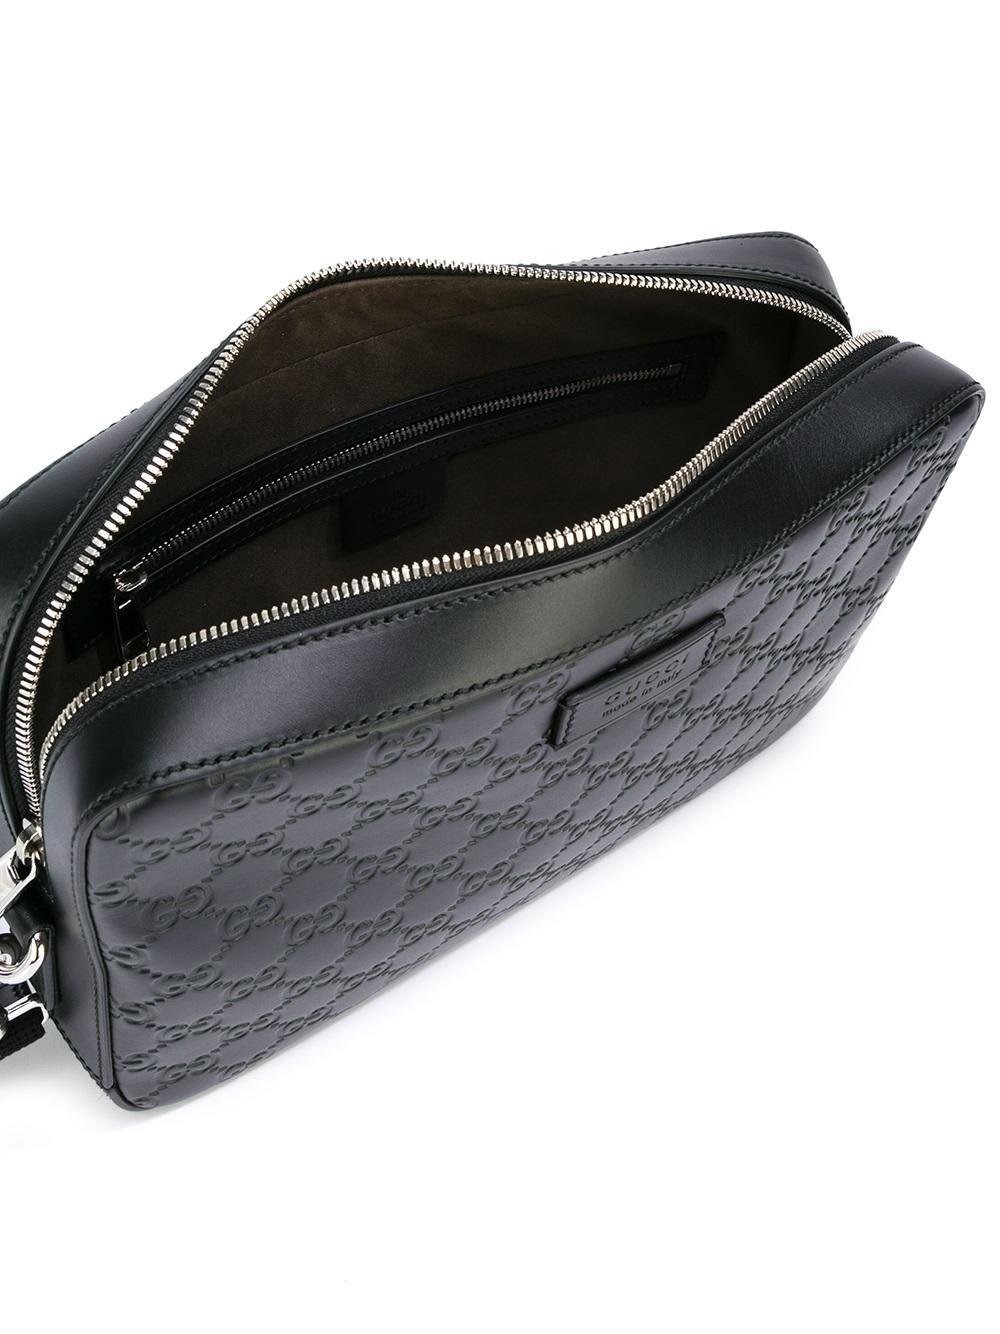 Gucci Leather Signature Clutch in Black for Men - Lyst